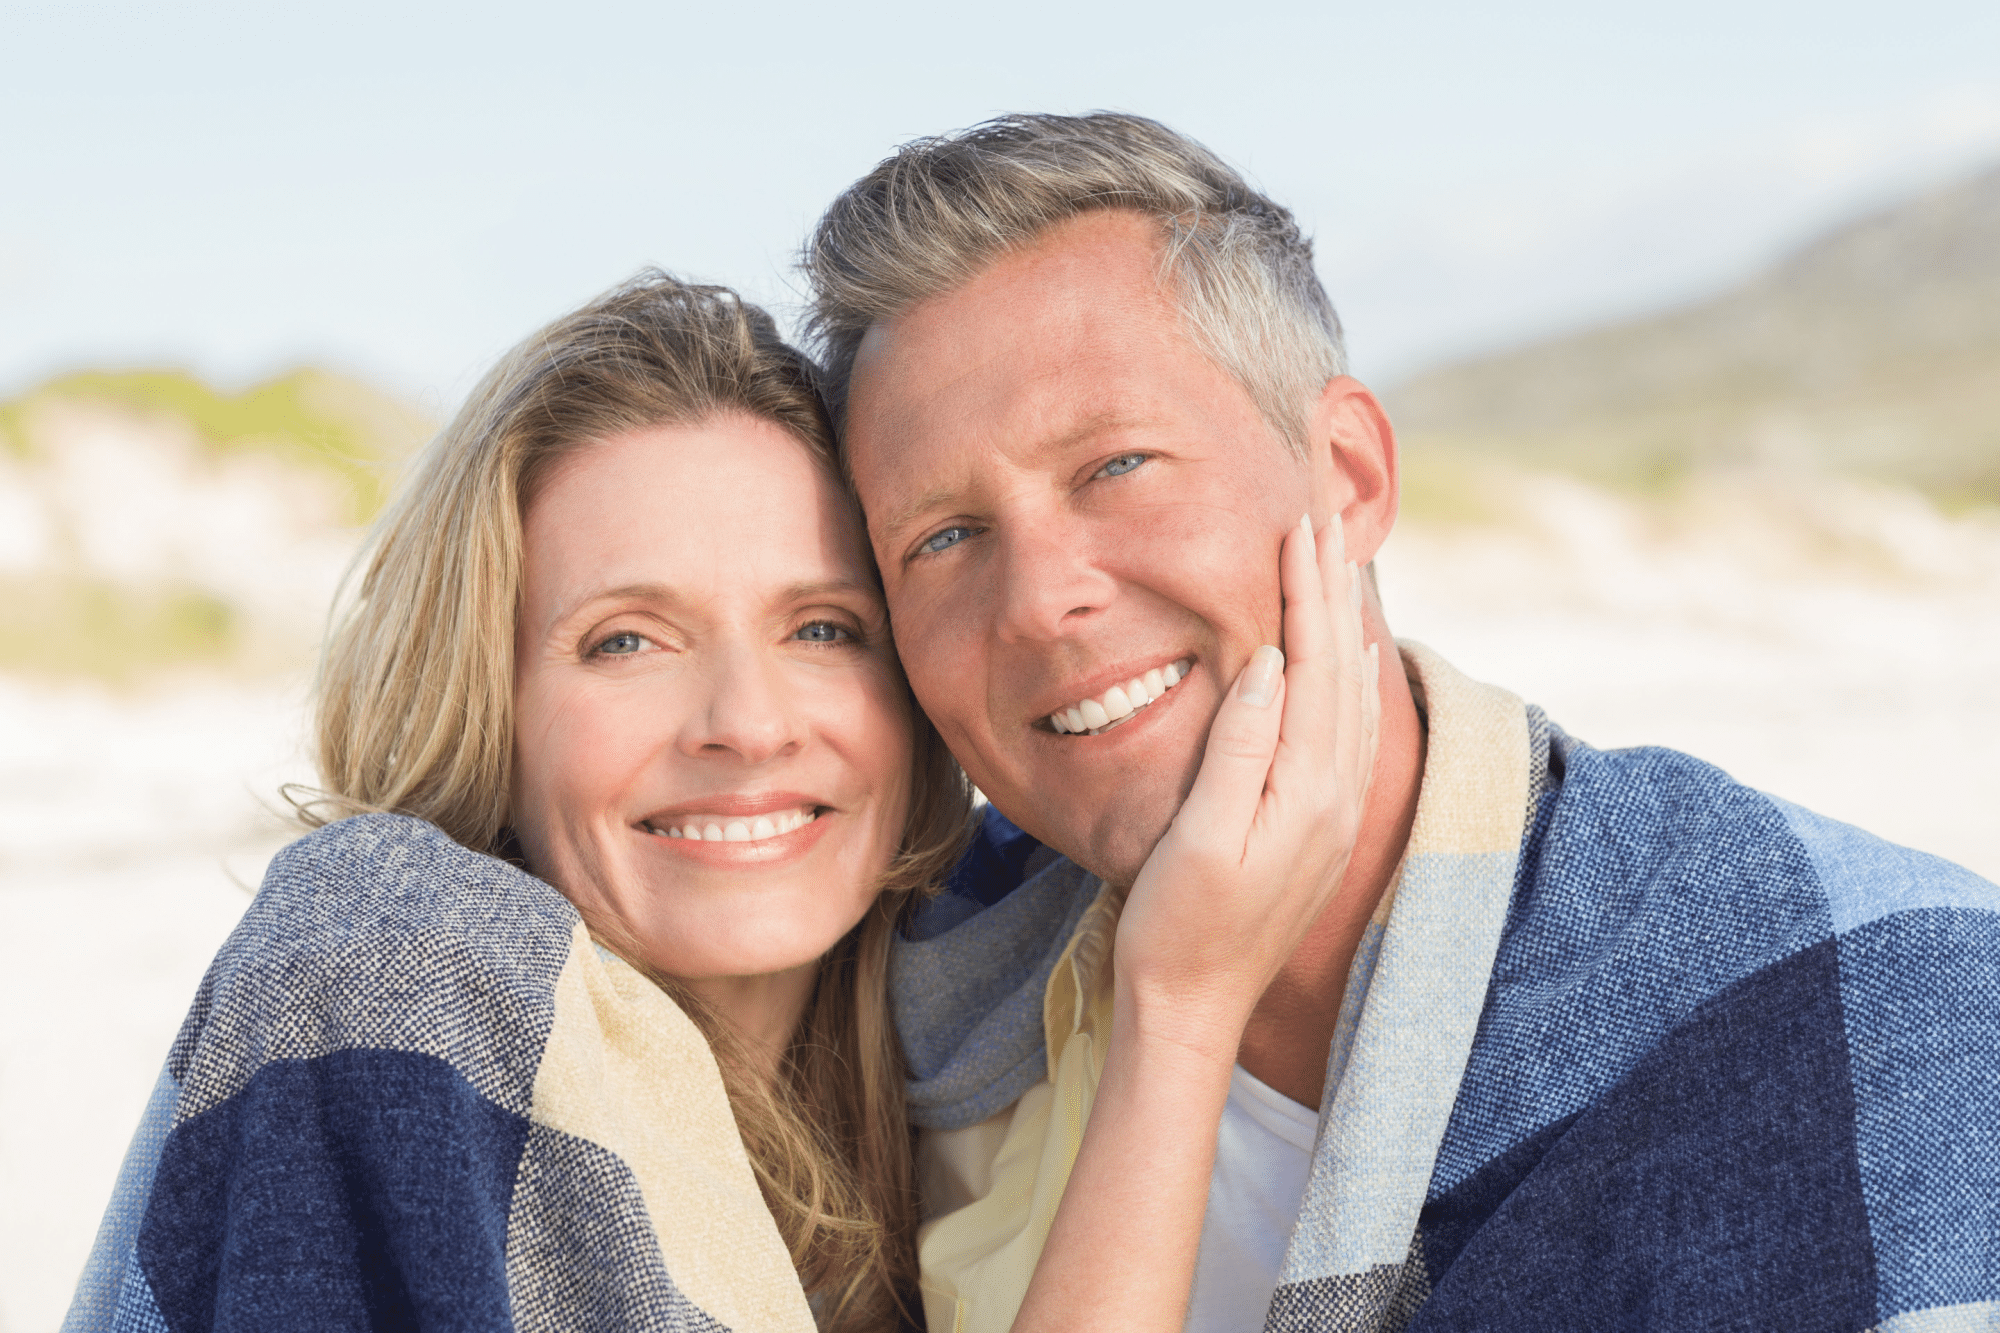 Benefits of Dental Implants Over Traditional Dentures Benefits of Dental Implants in Mobile, AL. AFD. clear aligners, dental implants, teeth whitening and more in Mobile, AL 36608. Ph:251-344-5461 bridges mobile Dr. James Whatley, Dr. Will Clokey. Alabama Family Dental. Family Dentistry, Cosmetic Dentistry, General Dentistry, Restorative Dentistry Clear Aligners, Implants, Emergency Dental, Teeth Whitening, Veneers, Dentures in Mobile, AL 36608